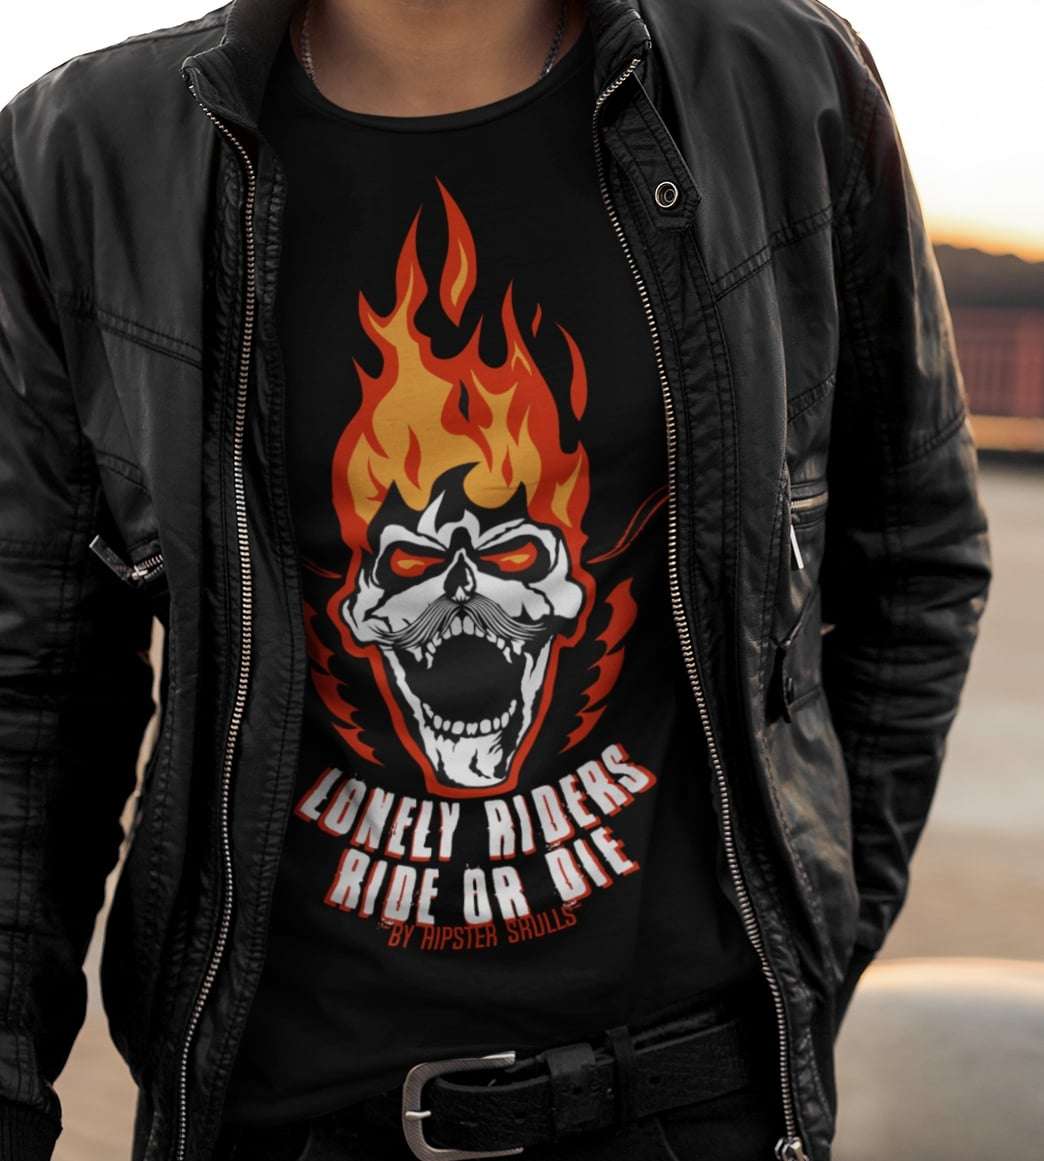 Lonely riders - ride or die by Hipster Skulls, flame evil skull